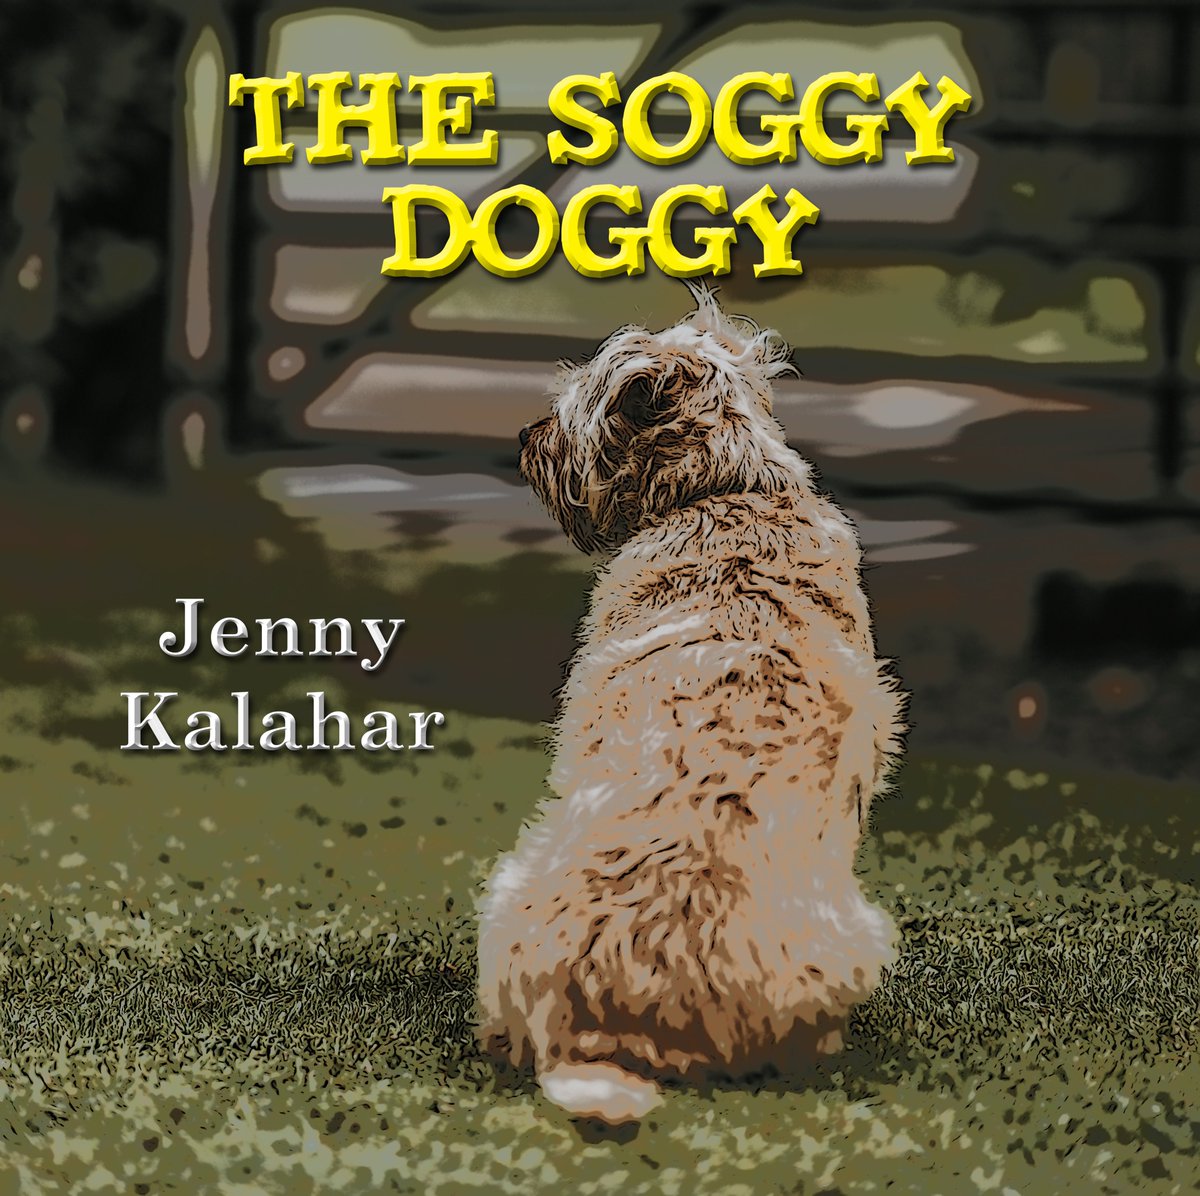 The Soggy Doggy: a sweet, family-friendly photo storybook in the style of The Wonky Donkey. A fun and funny gift for the dog fan on your shopping list. https://t.co/iyZNI0FXuz #dogbook #dogbooks #GiftBook #dogs #WonkyDonkey #CR4U #EasterGift https://t.co/z7FkN4Xwnw